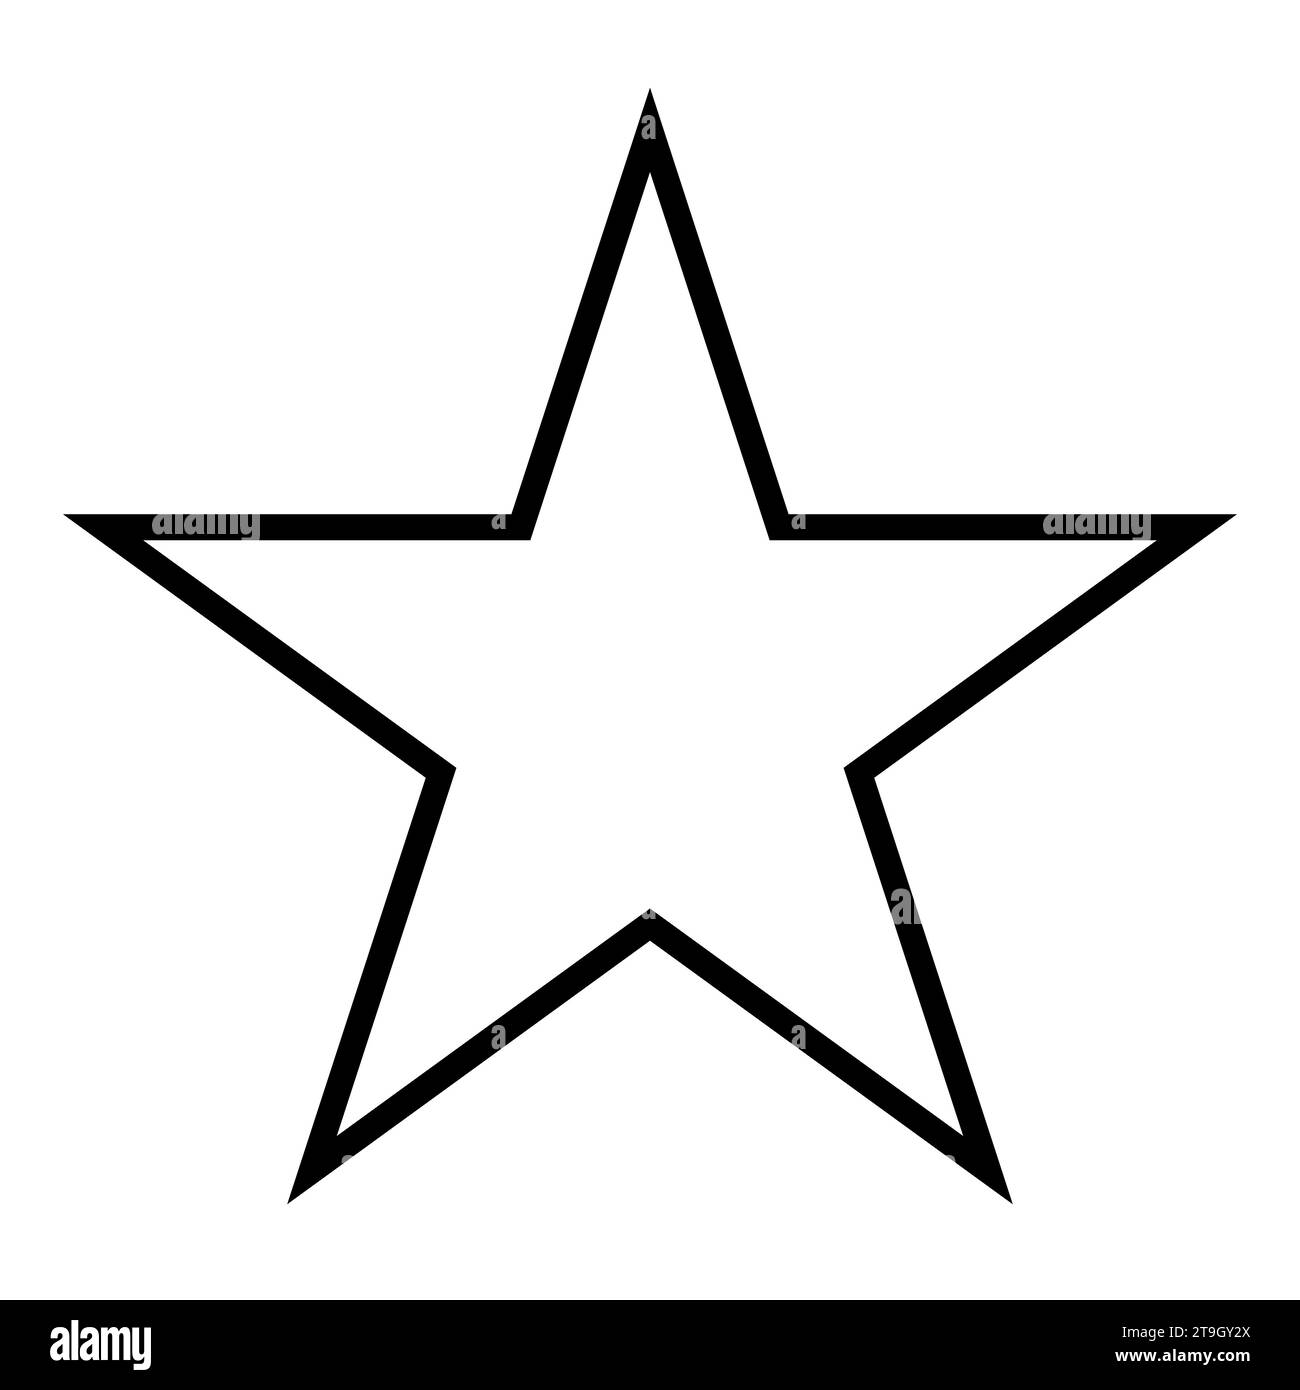 star shape symbol, black and white vector silhouette illustration of simple five-pointed star Stock Vector